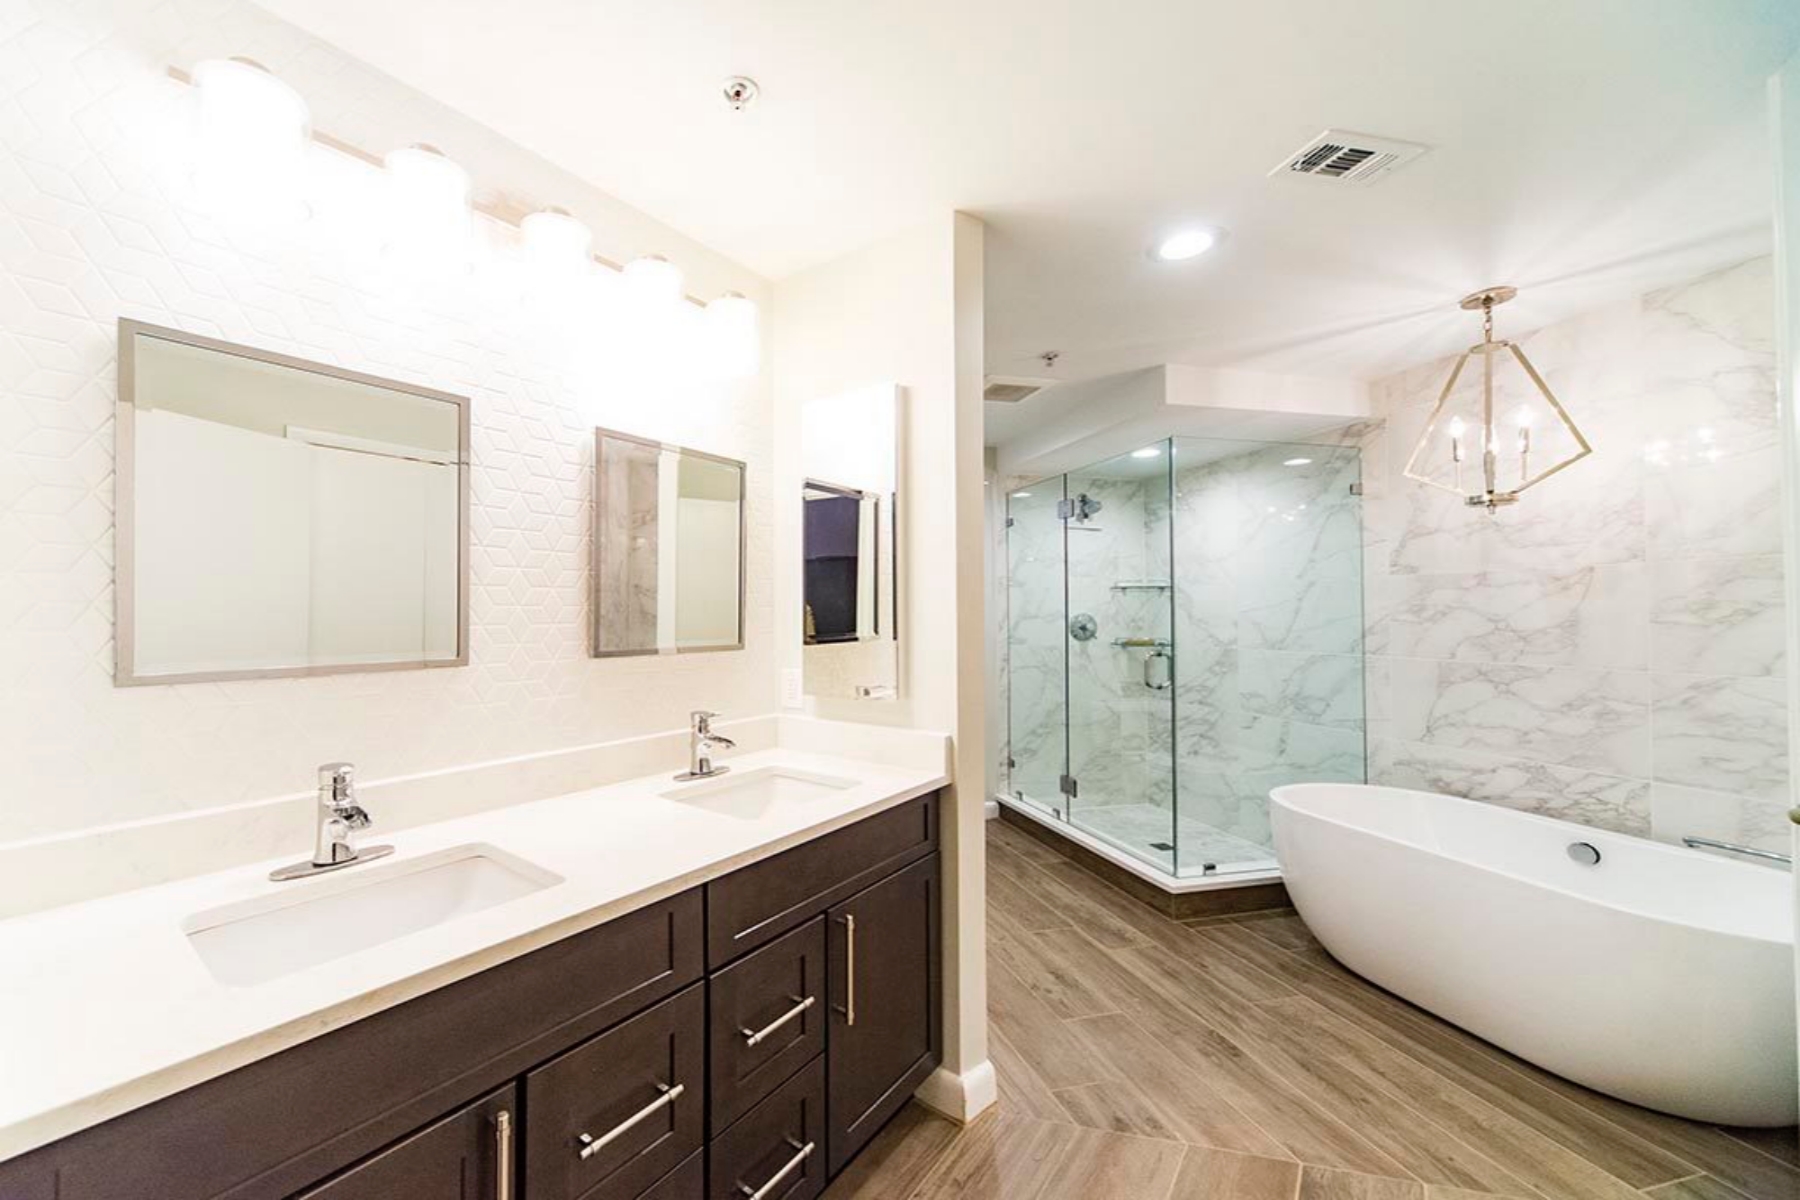 Improvements to Consider for Your Next Bathroom Remodel